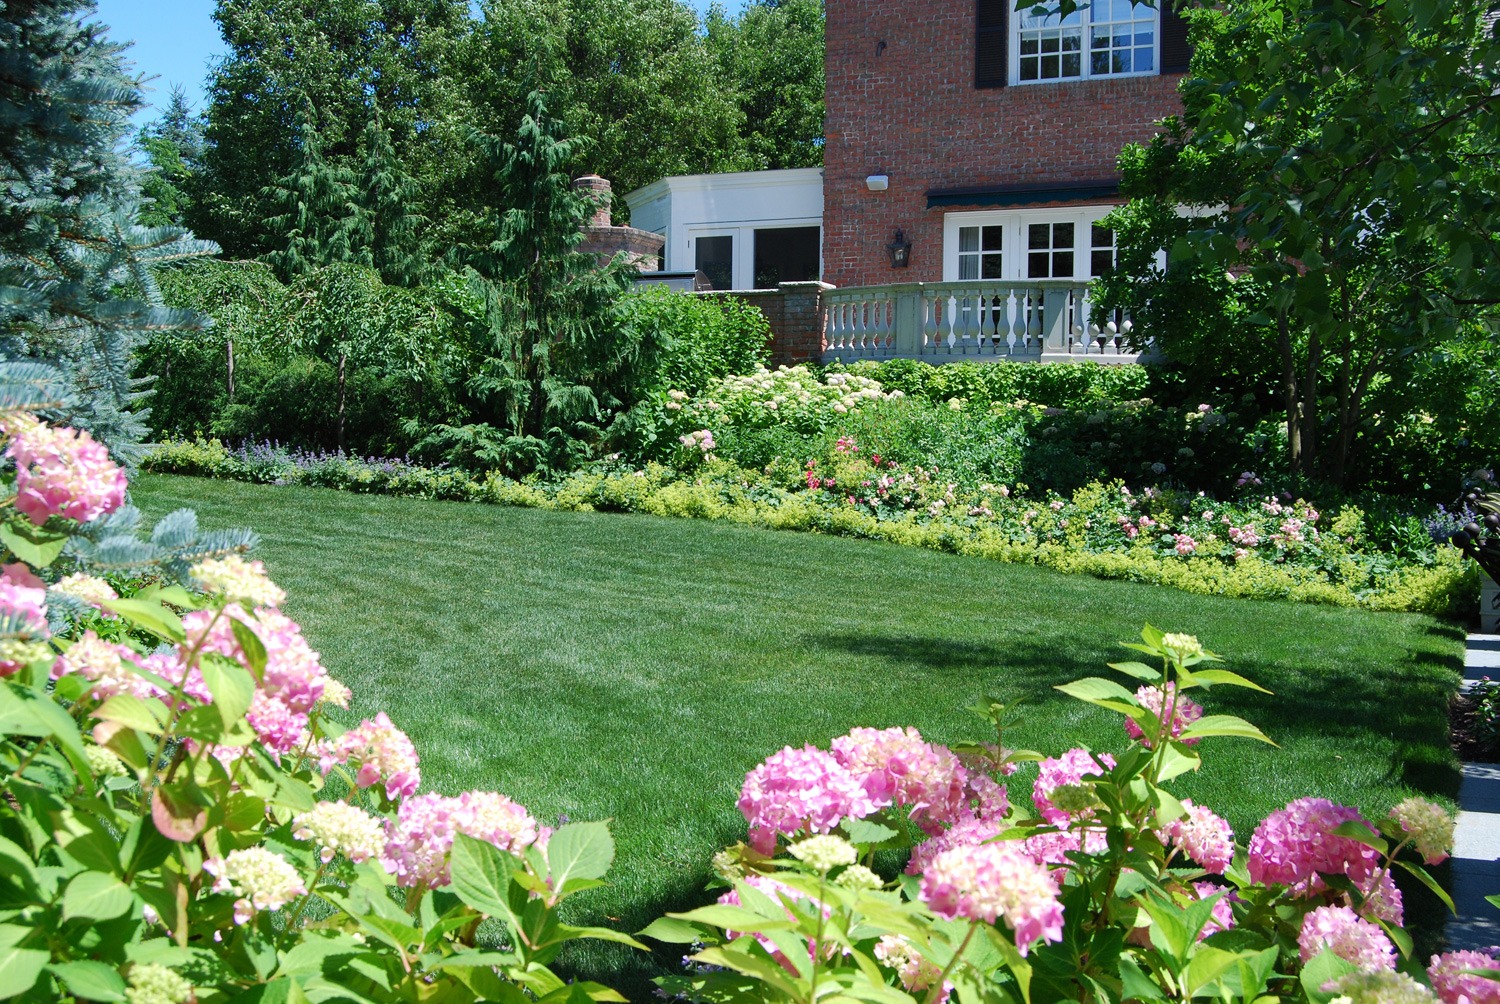 This image shows a well-manicured garden with vibrant hydrangea flowers, a lush green lawn, and a brick house with white trim in the background.